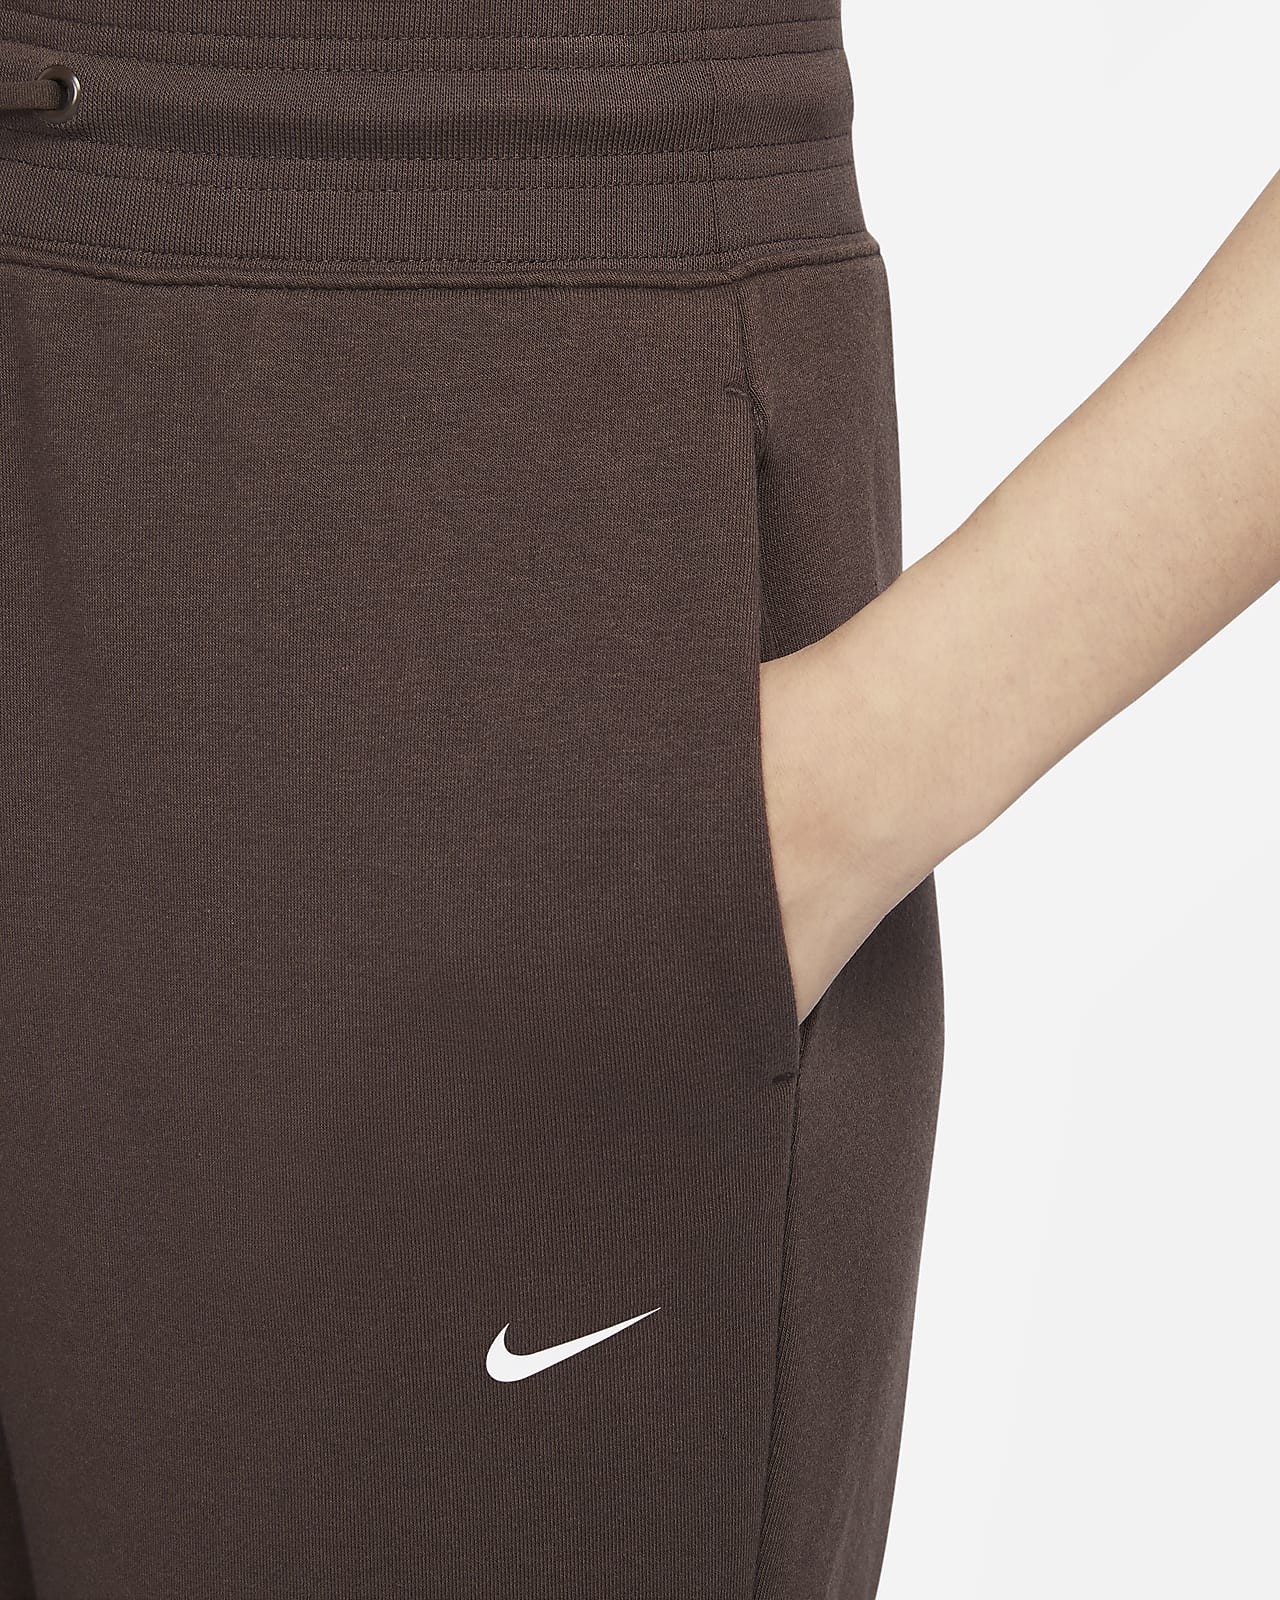 Nike Dri-FIT One Women's High-Waisted 7/8 French Terry Joggers. Nike IN